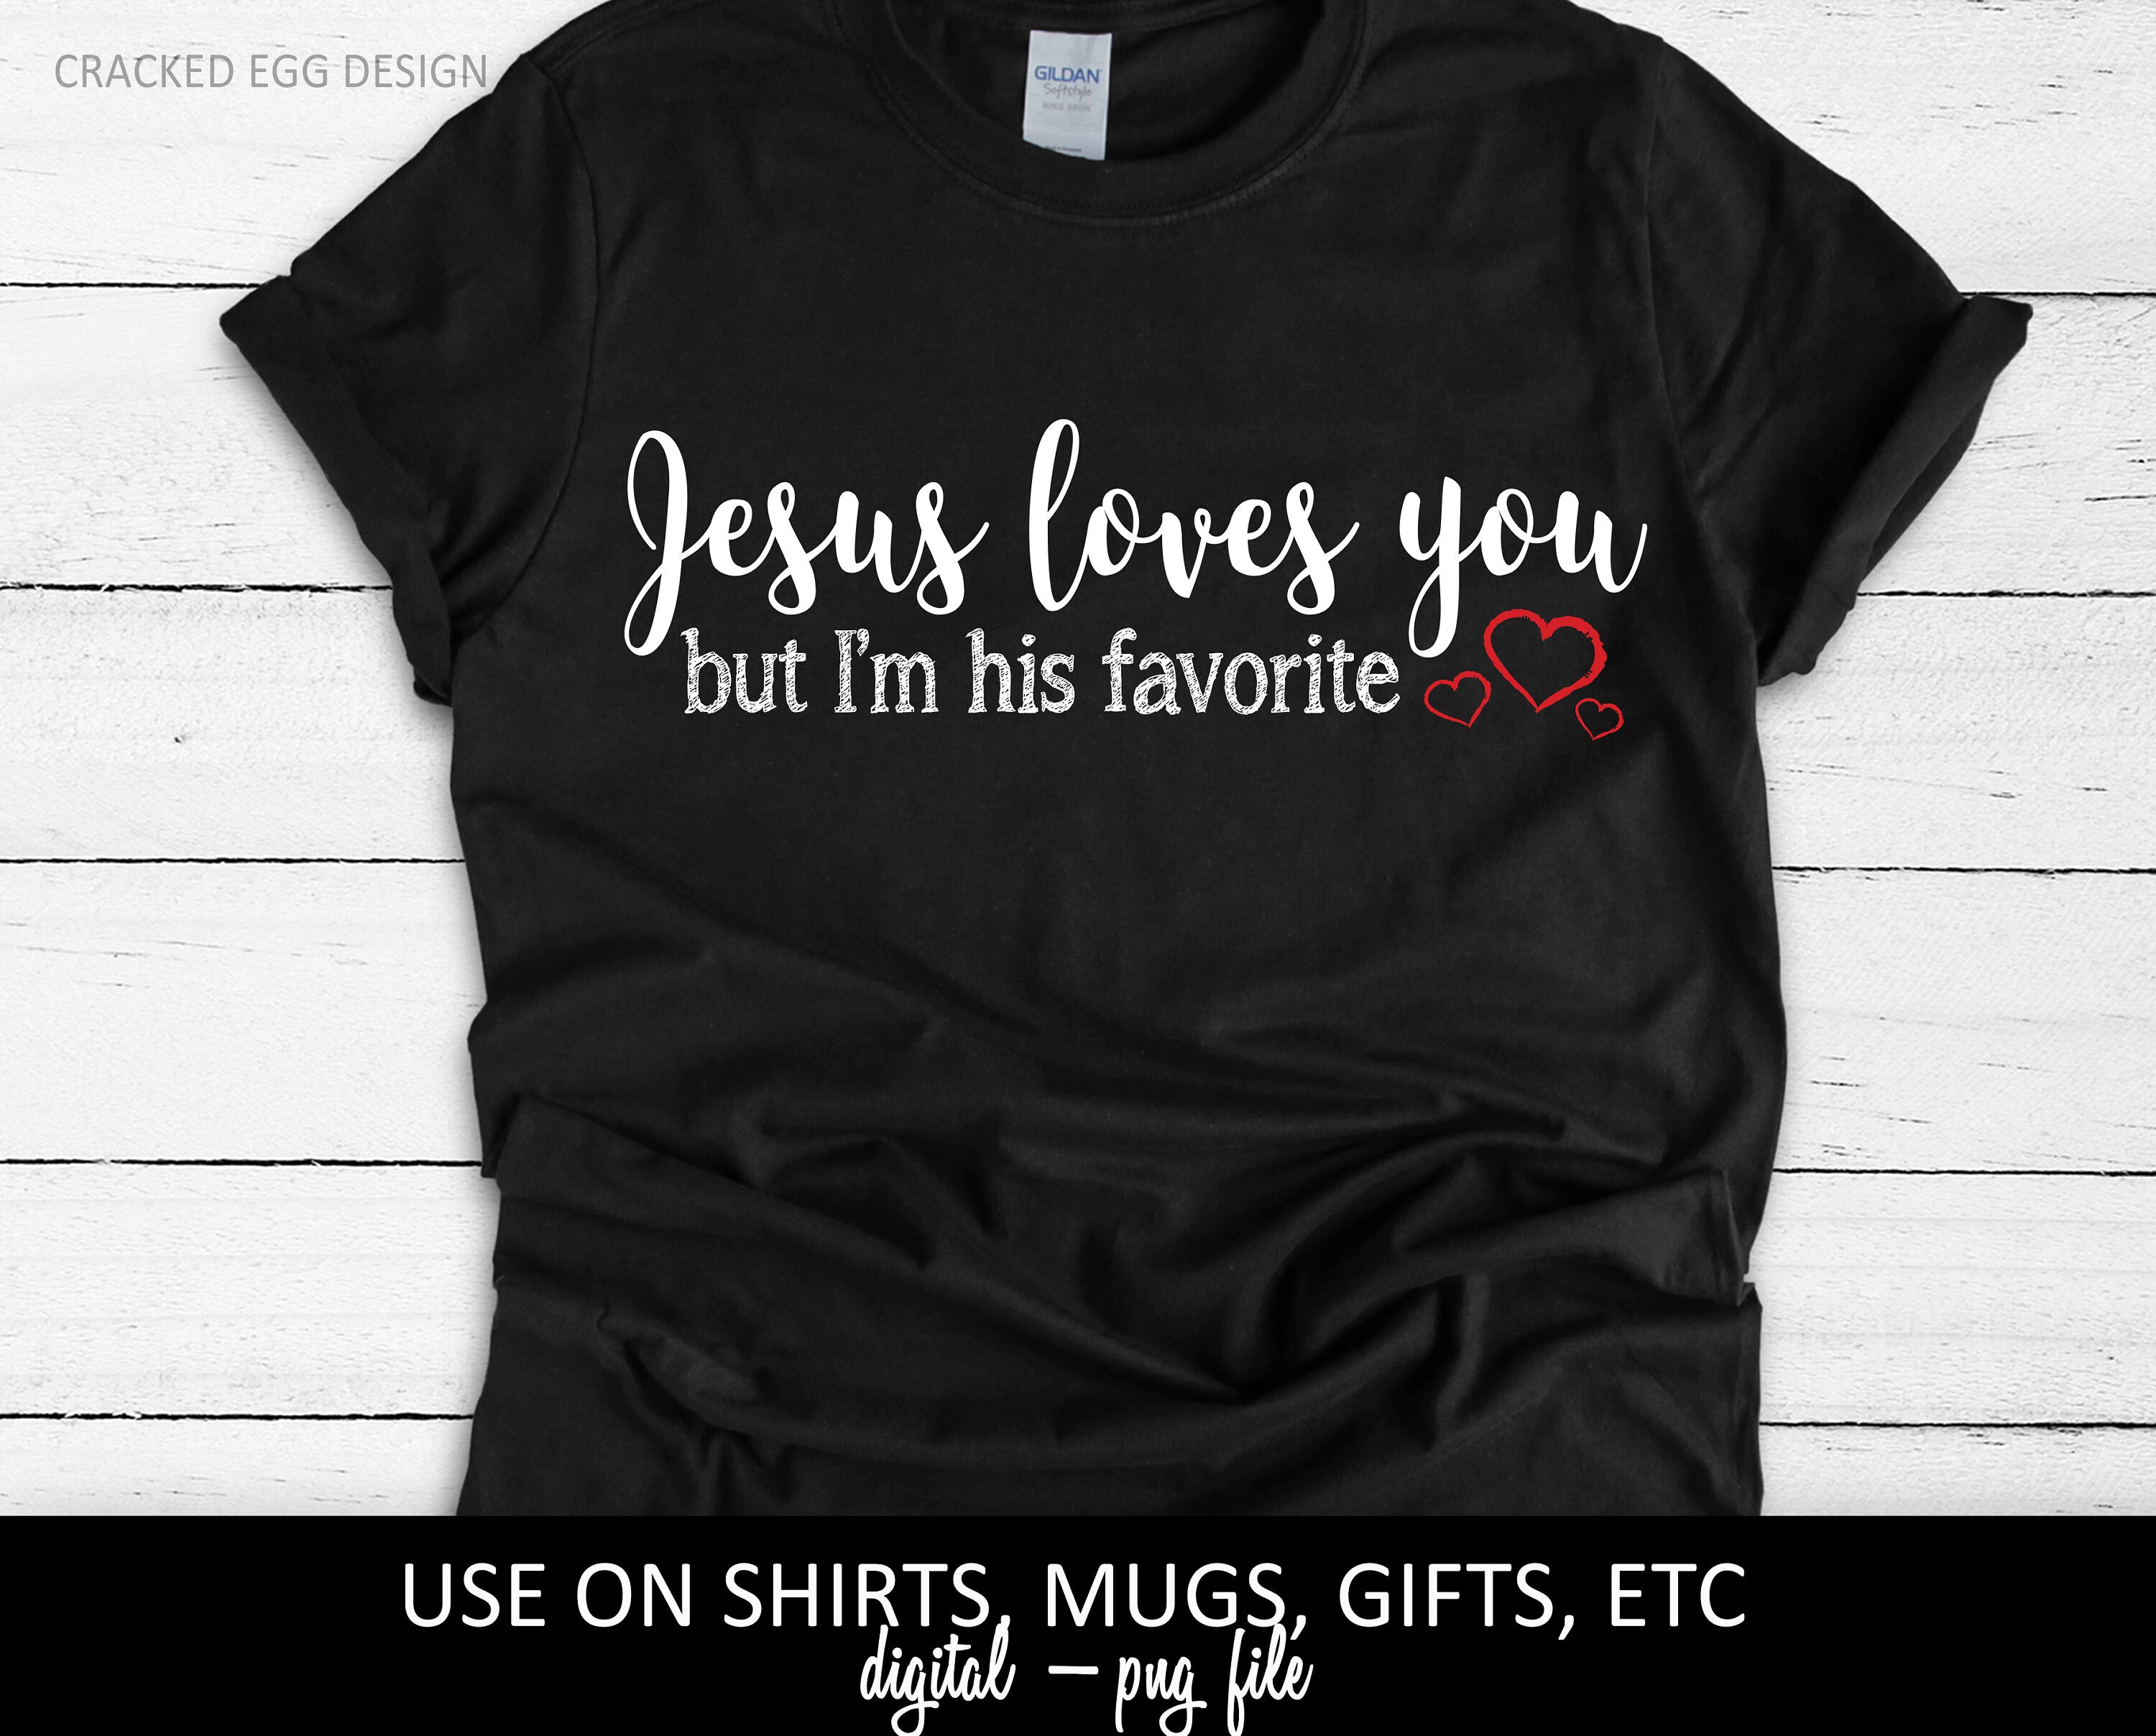 Jesus loves you but I'm his favorite funny religious | Etsy